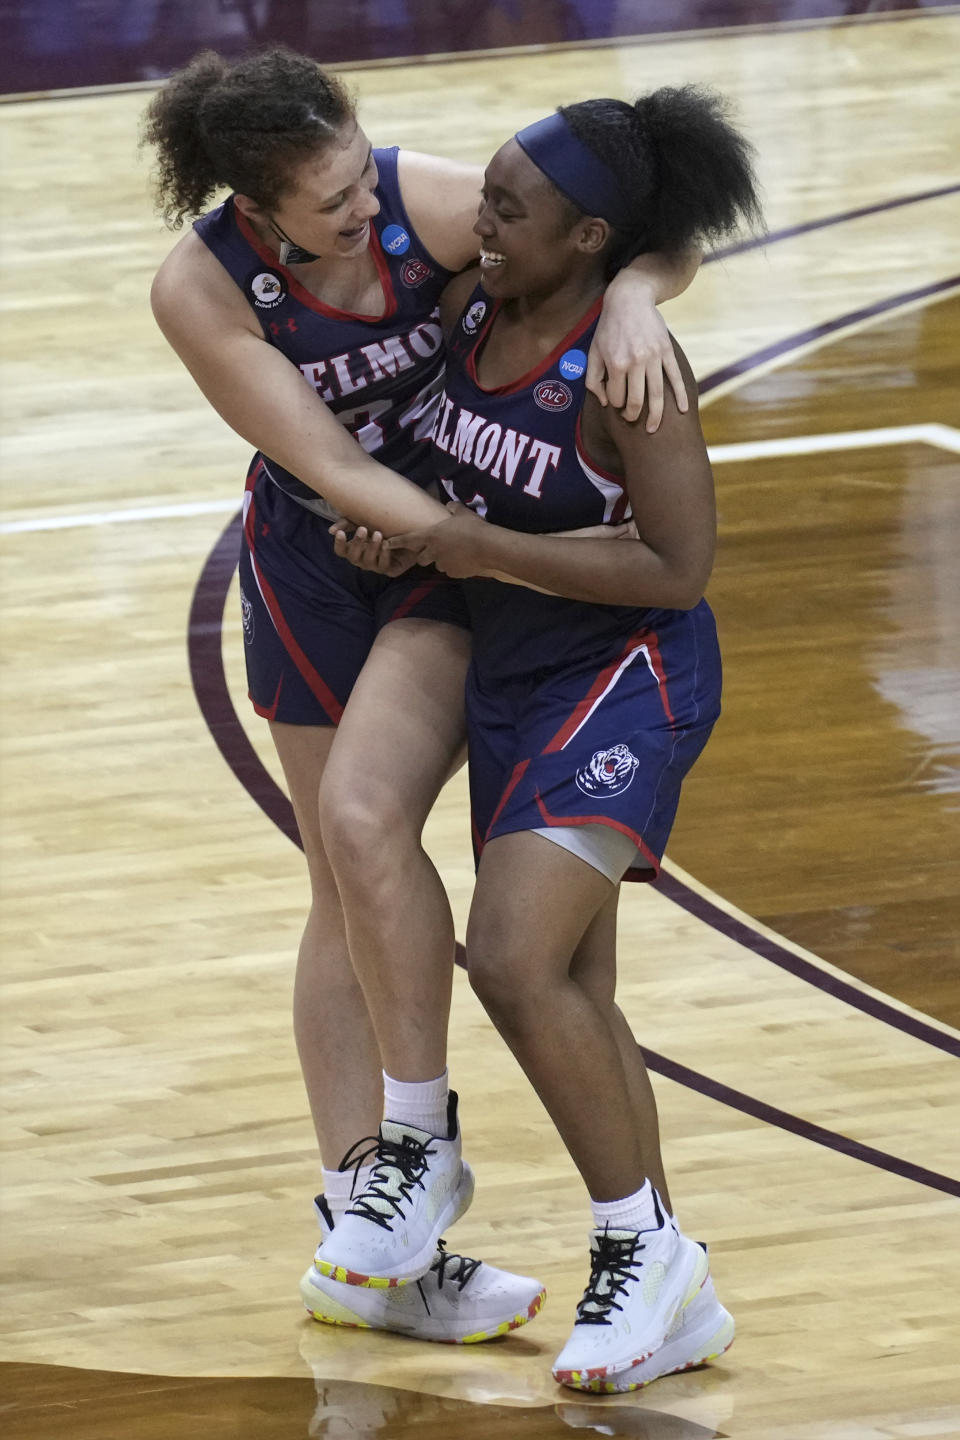 Destinee Wells, right, celebrates with Cam Browning, left, after Belmont's win over Gonzaga in a college basketball game in the first round of the women's NCAA tournament at the University Events Center in San Marcos, Texas, Monday, March 22, 2021. (AP Photo/Chuck Burton)